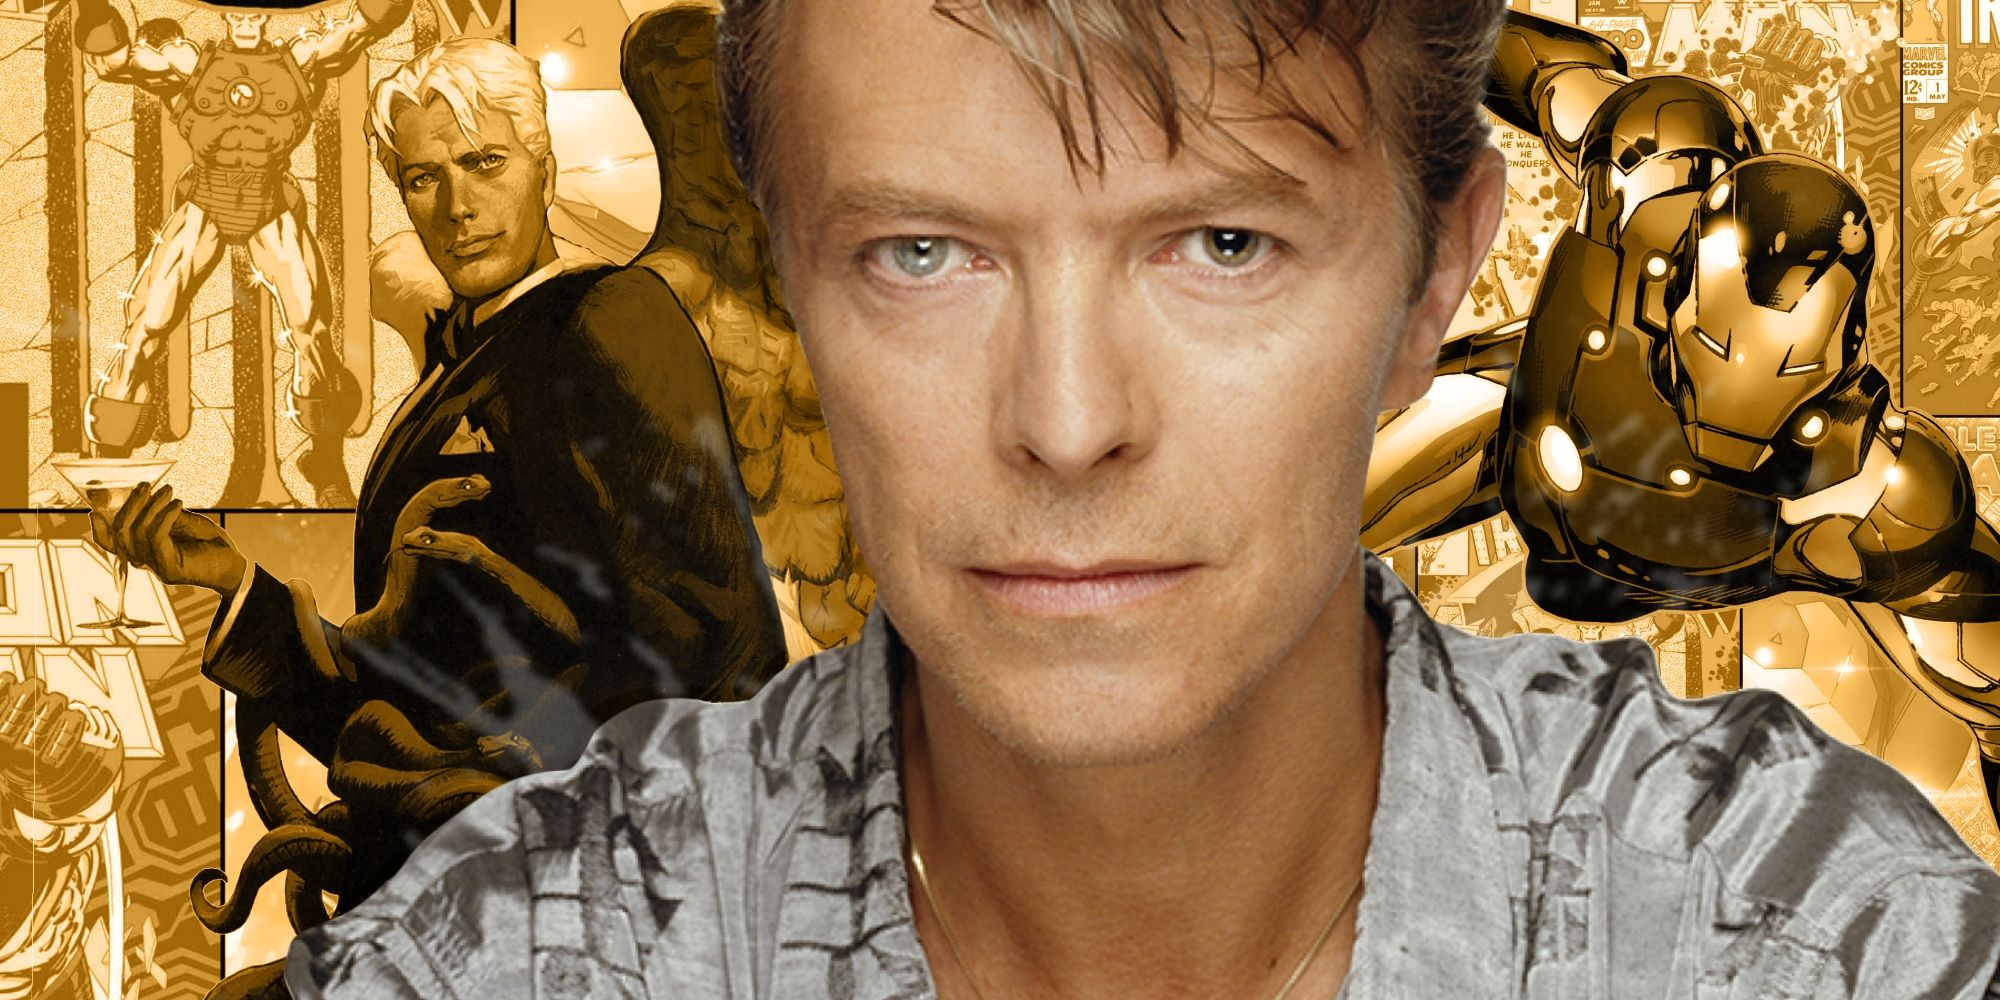 David Bowie pictured beside DC Comics' Lucifer Morningstar and Marvel Comics' Iron Man